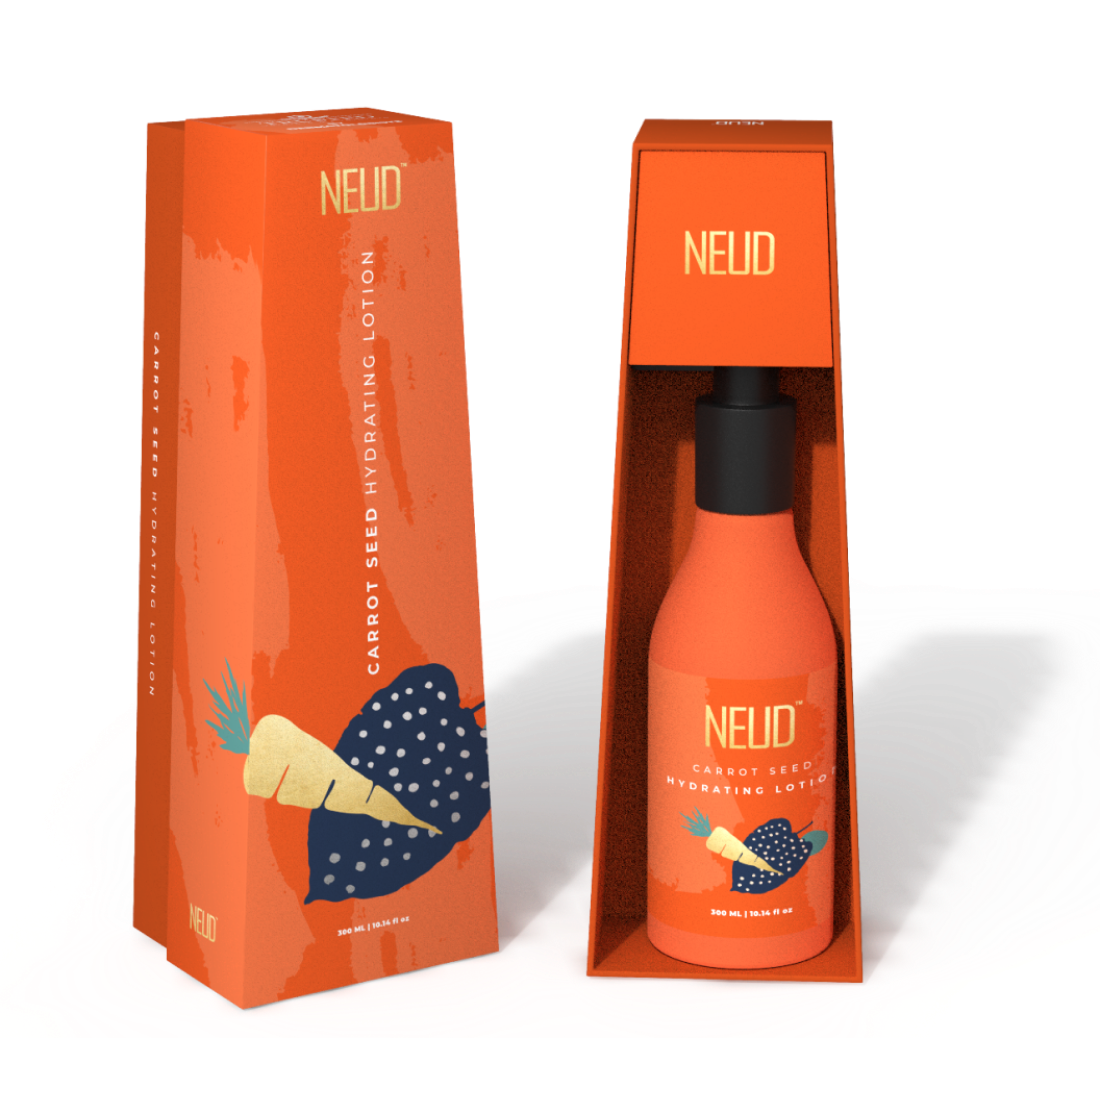 NEUD Carrot Seed Premium Hydrating Lotion for Men & Women - Get Free Zipper Pouch